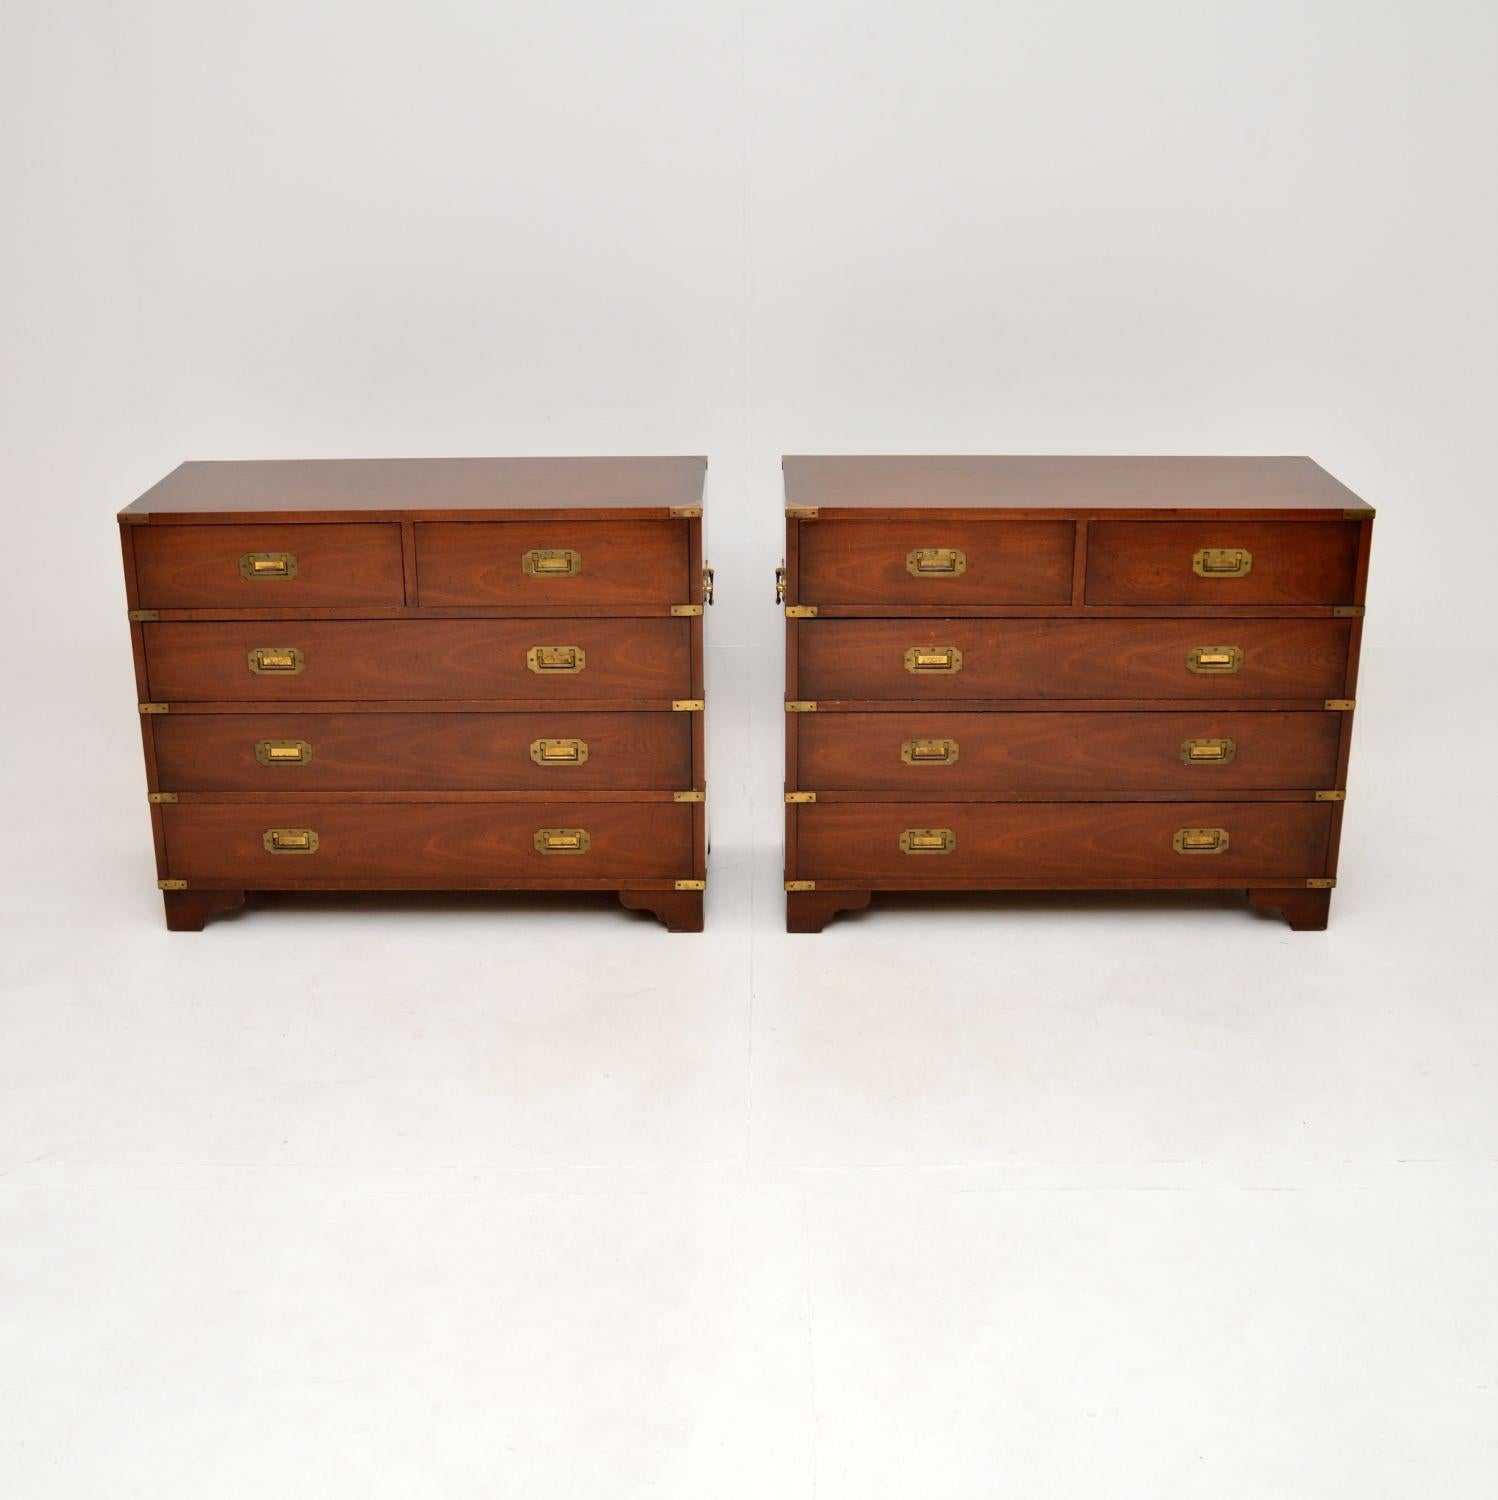 A smart and extremely well made pair of antique military campaign style chest of drawers. They were made in England, they date from around the 1950’s.

The quality is excellent, they are a great size and are very functional. The wood has a lovely